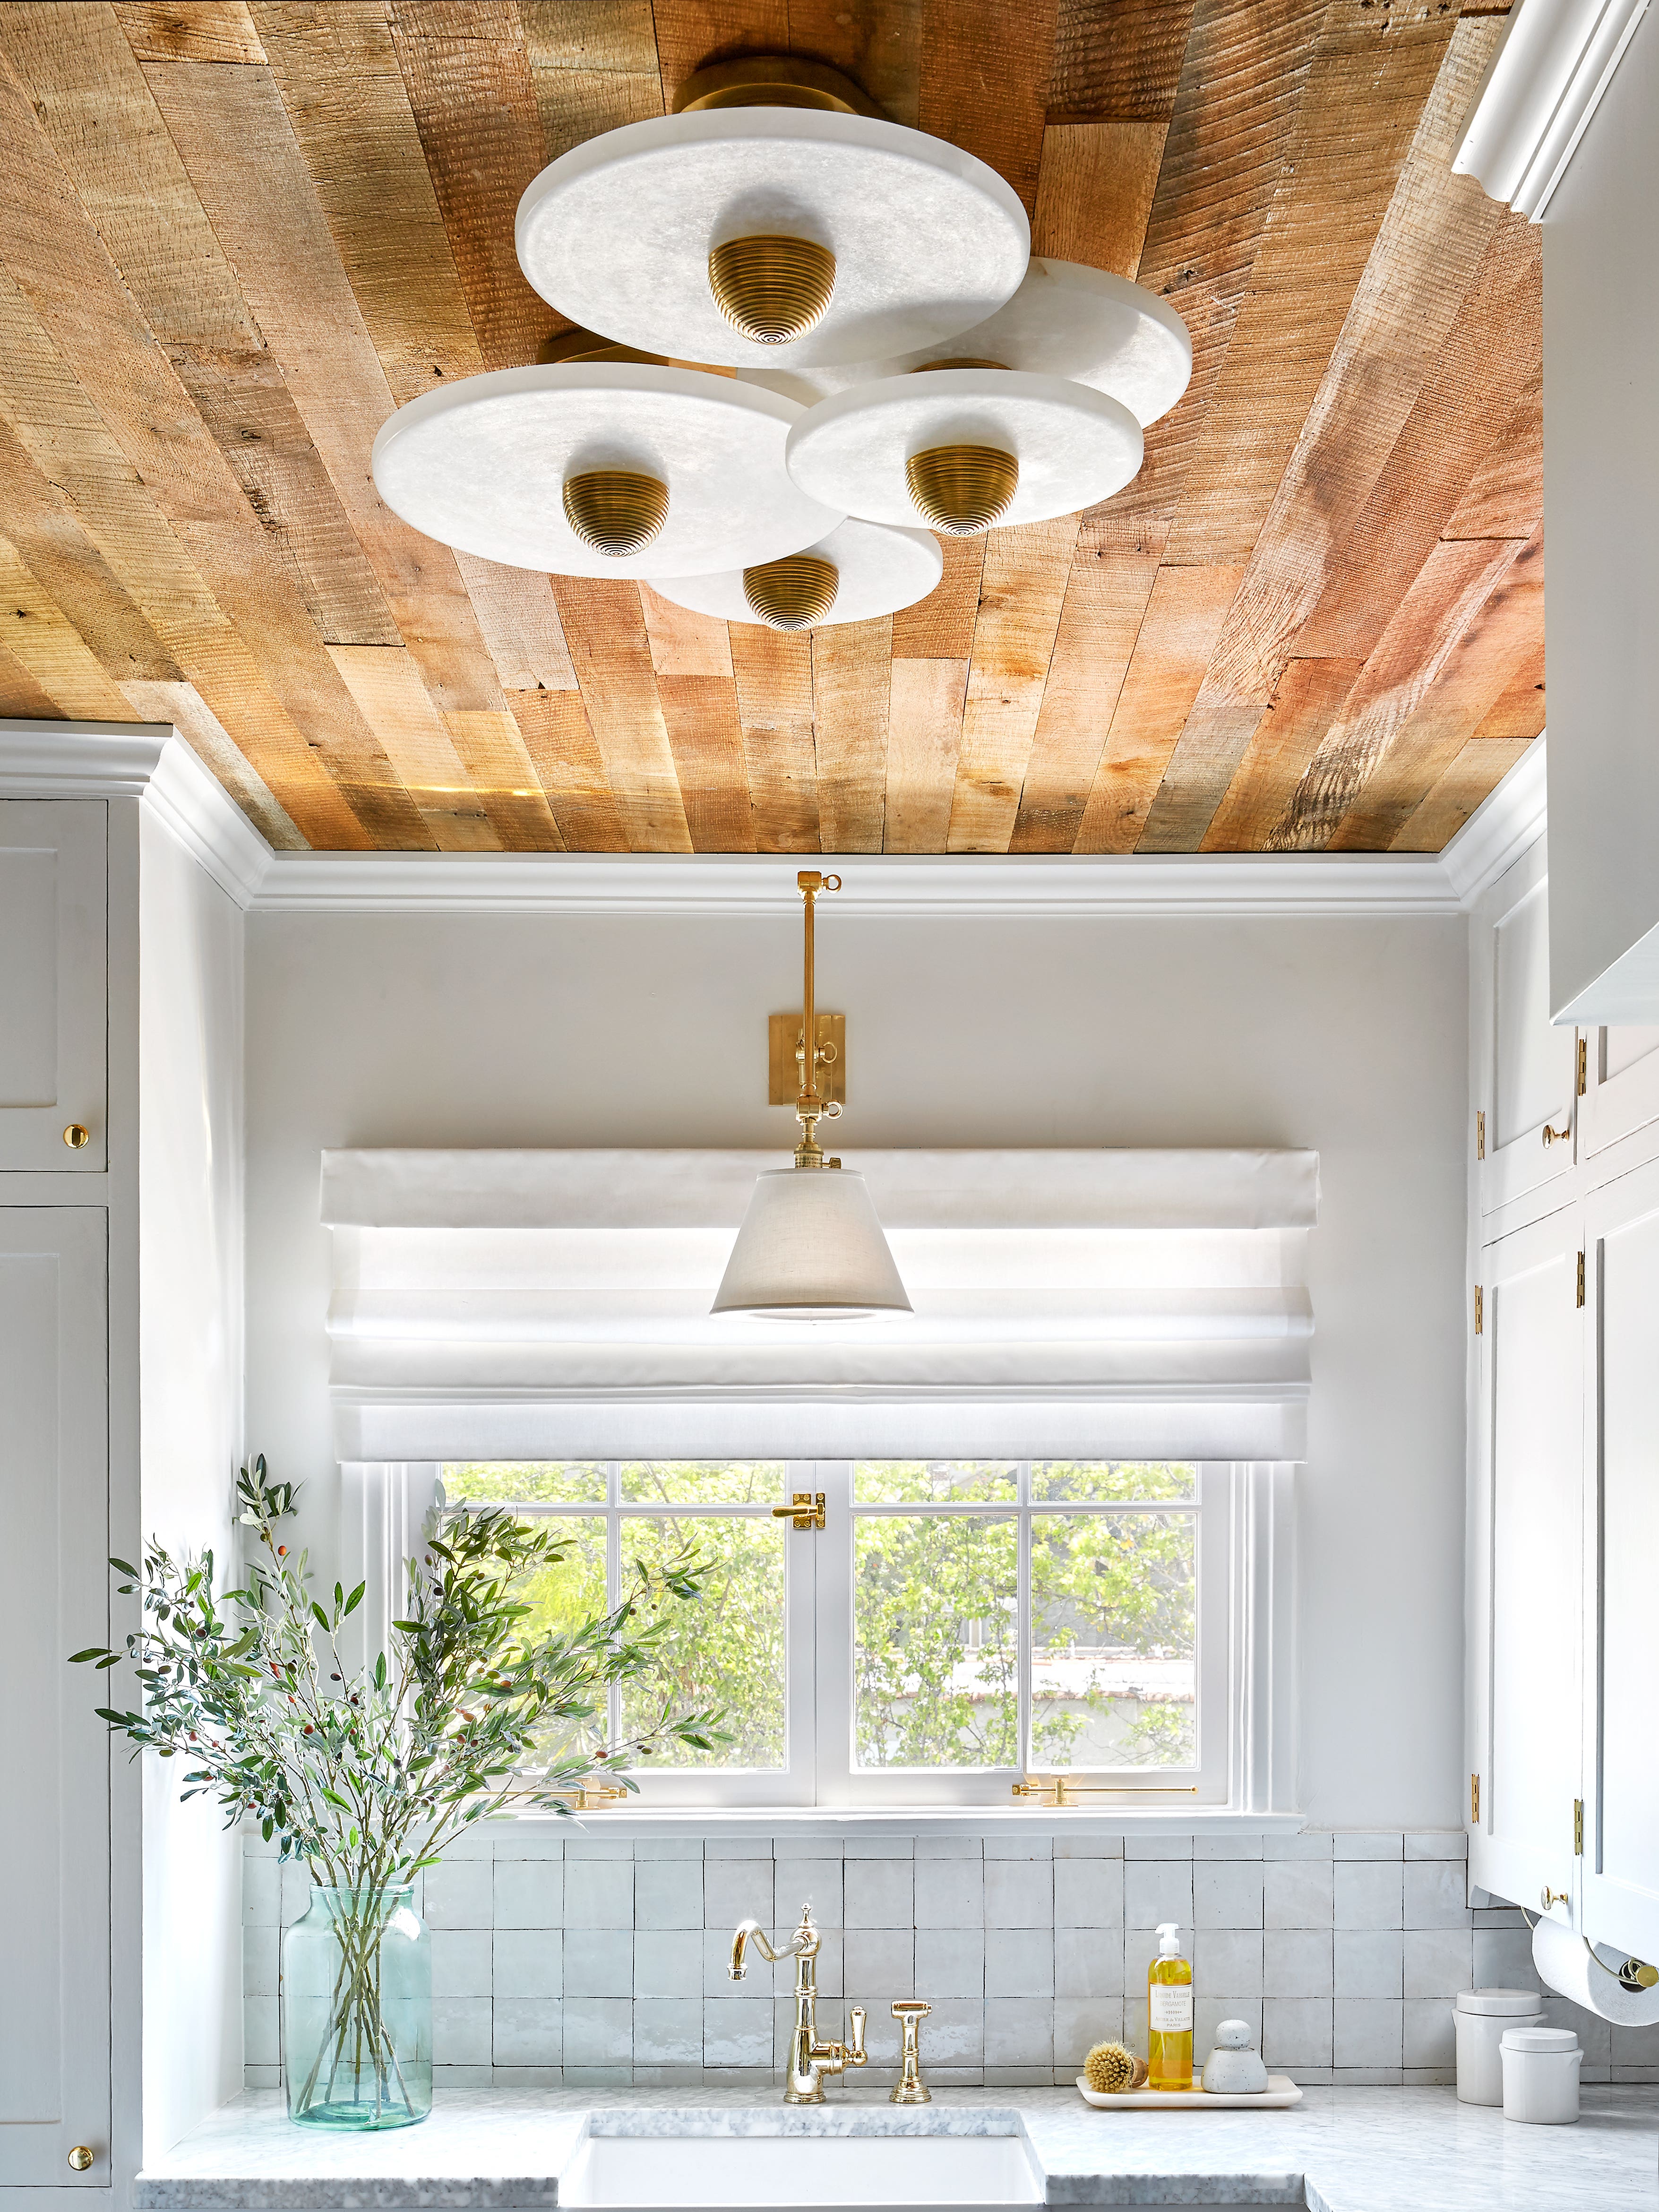 This Designer Put Floorboards on Her Kitchen Ceiling—And We Can’t Stop Staring